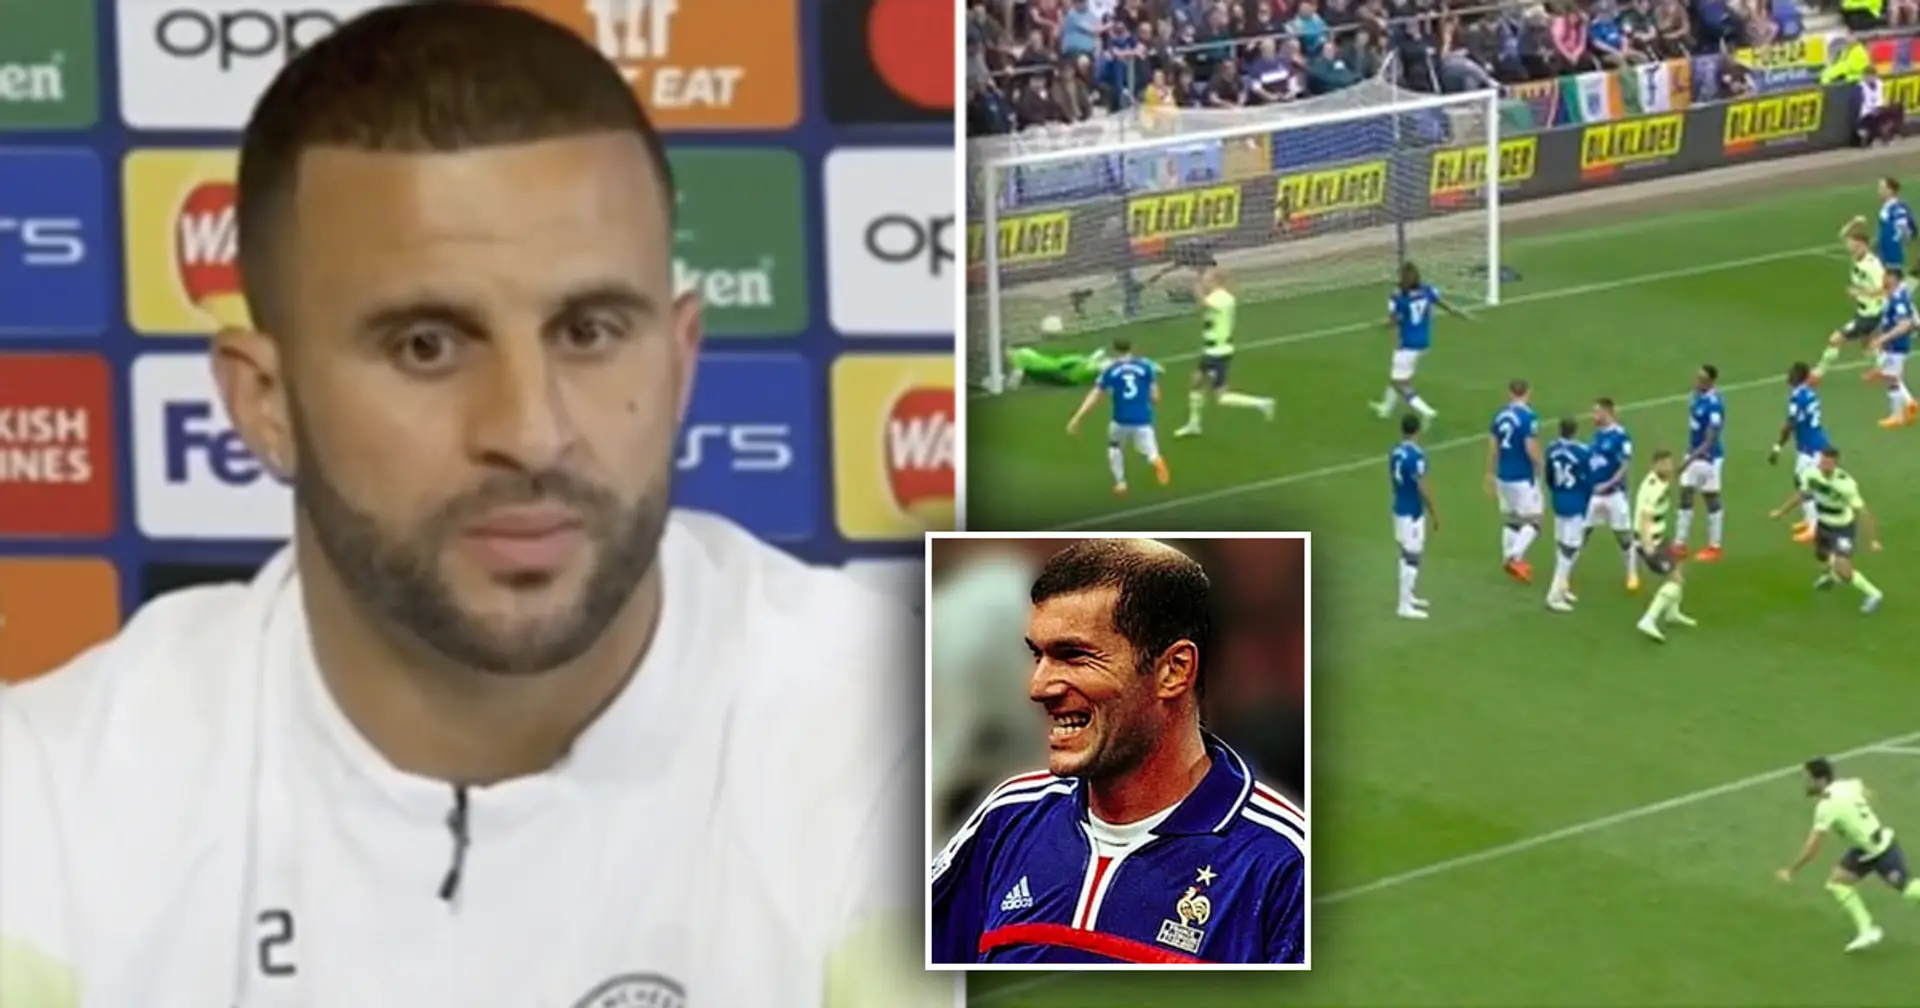 Kyle Walker names one player who 'turned into prime Zidane' in last few months – he will 99% join Barca